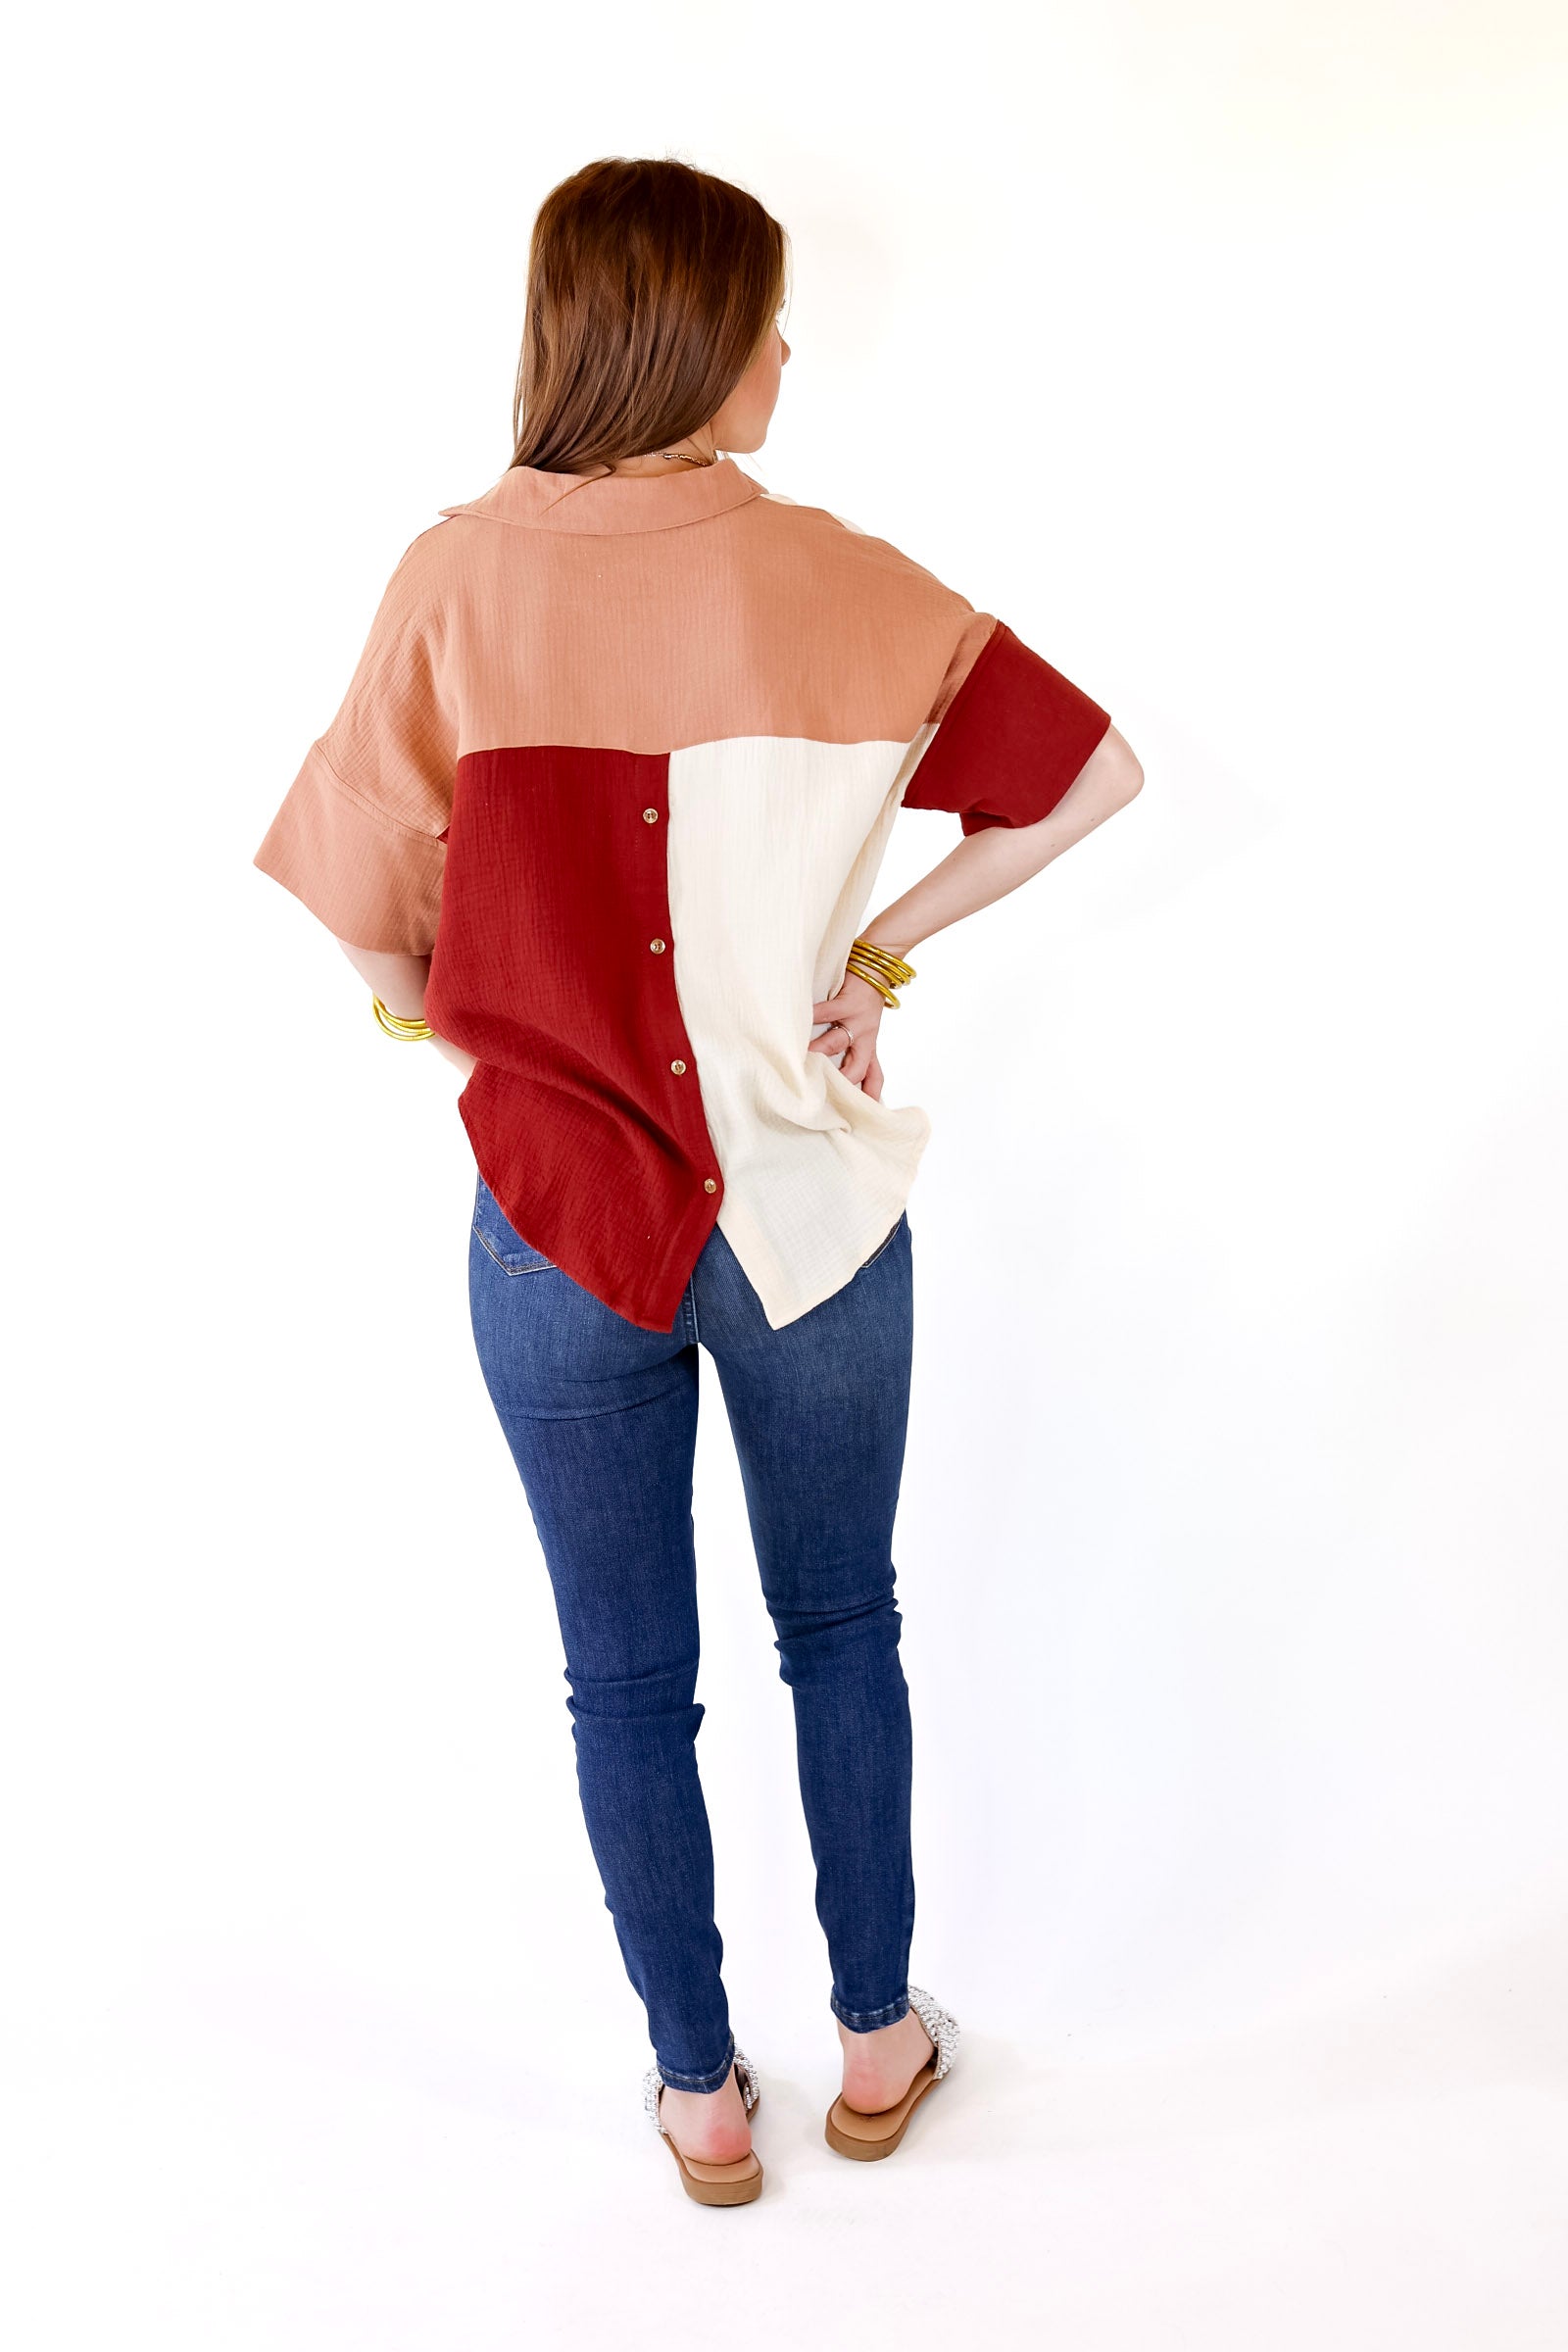 Burst of Joy Collared Color Block Top in Rust Brown Mix - Giddy Up Glamour Boutique